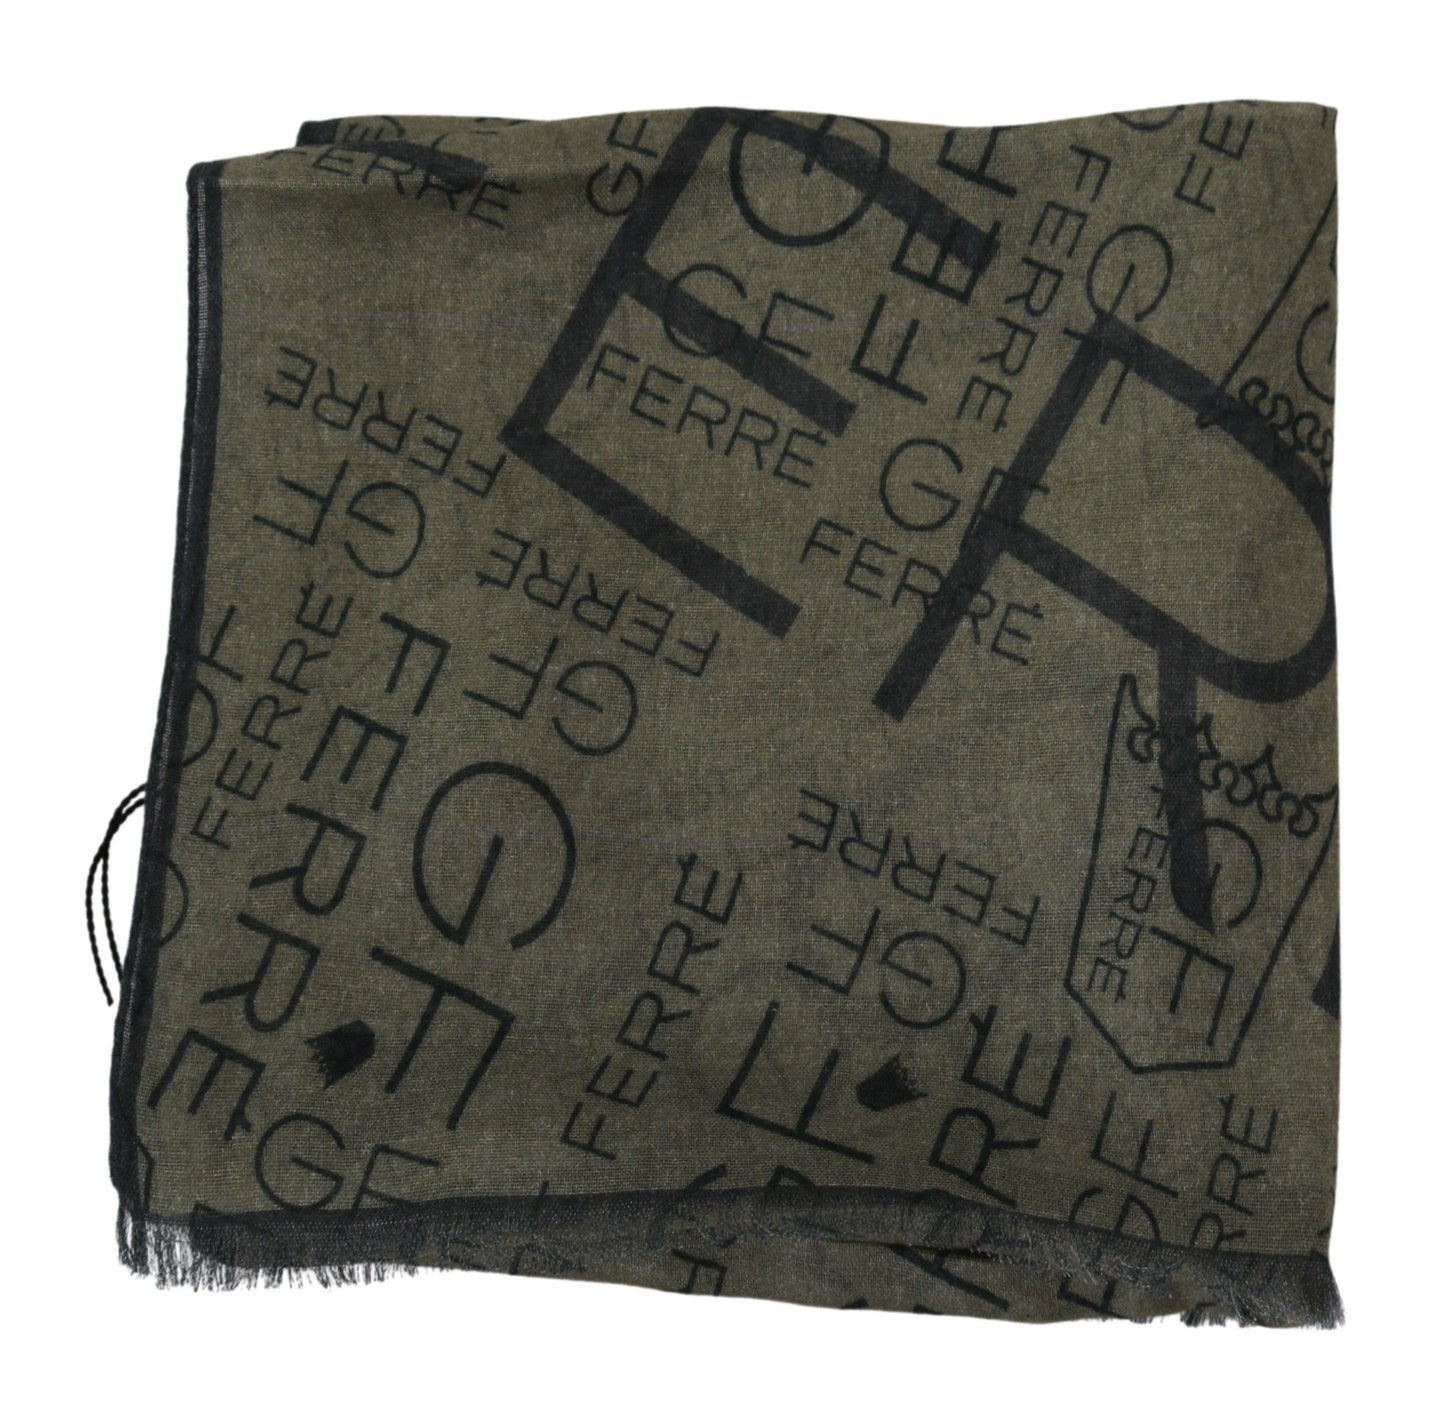 GF Ferre Green Wool Viscose Foulard Patterned Branded Scarf - Designed by GF Ferre Available to Buy at a Discounted Price on Moon Behind The Hill Online Designer Discount Store